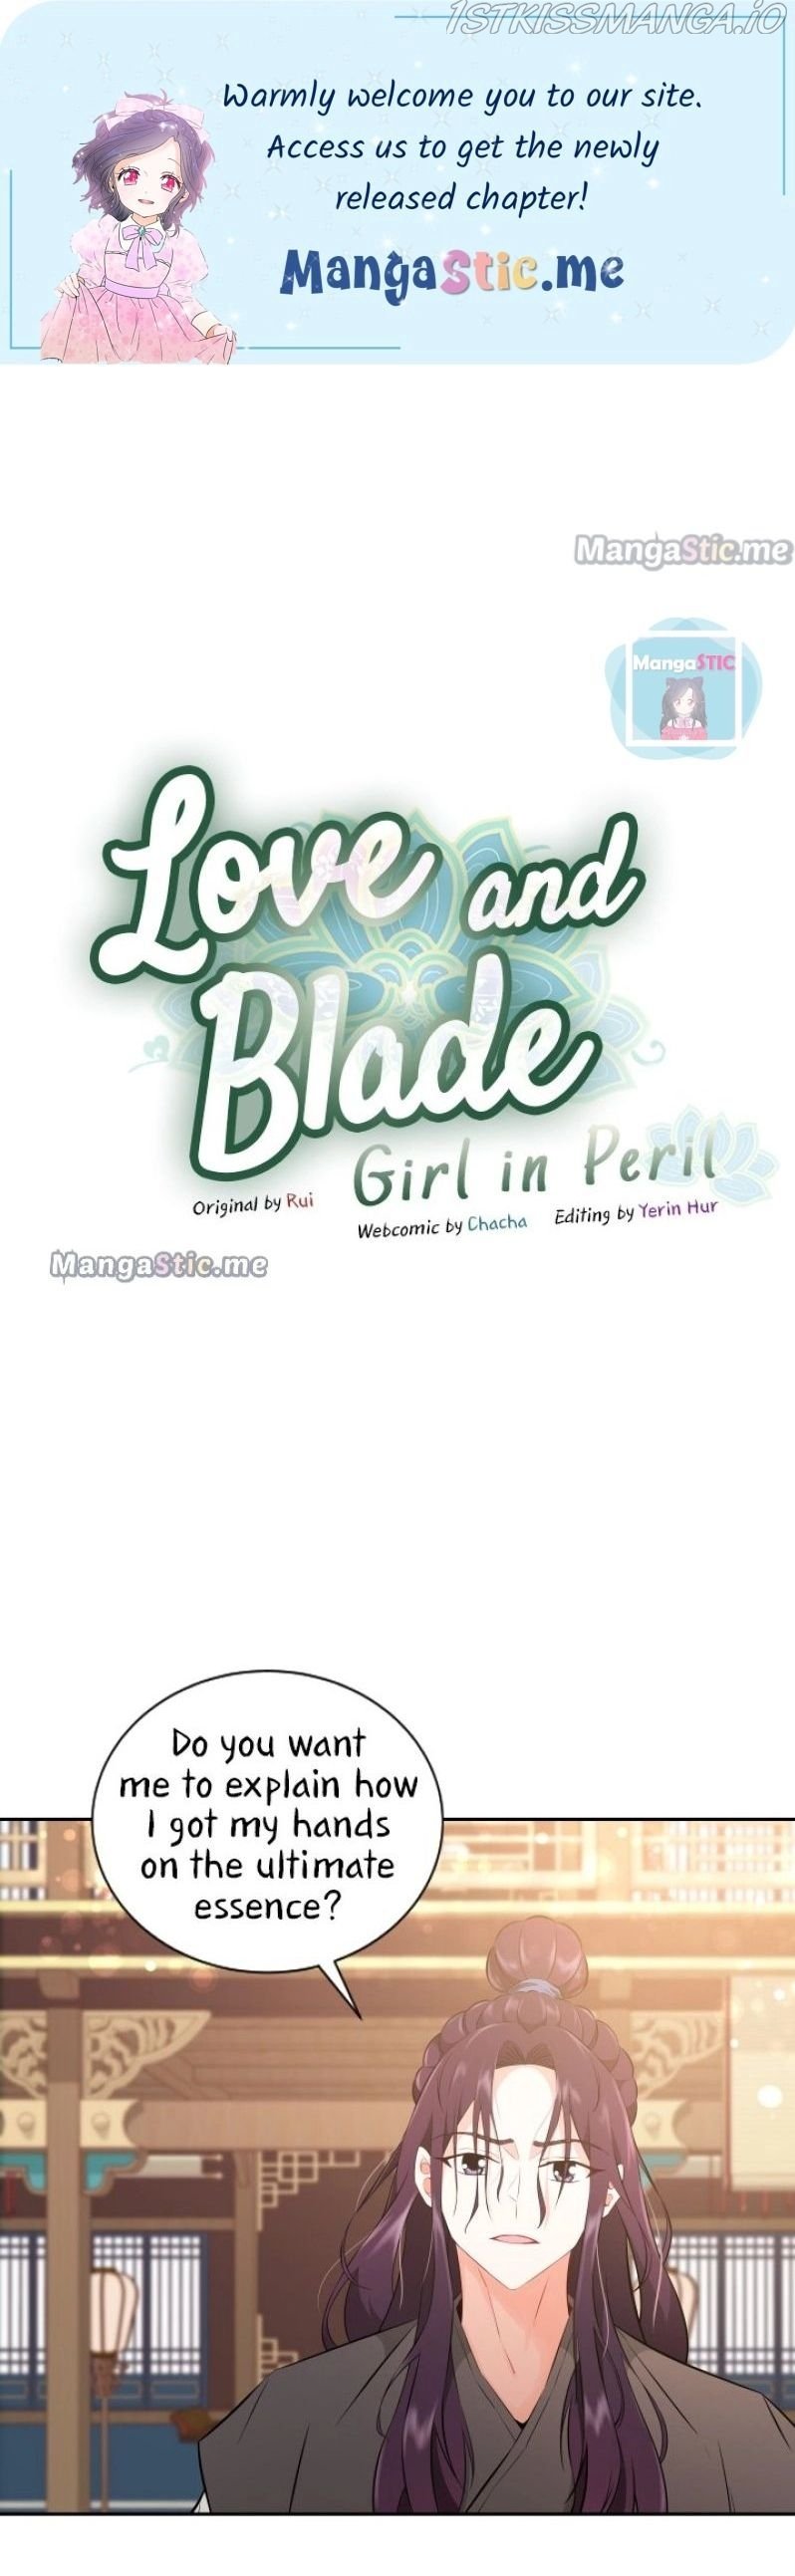 Love and Blade: Girl in Peril chapter 8